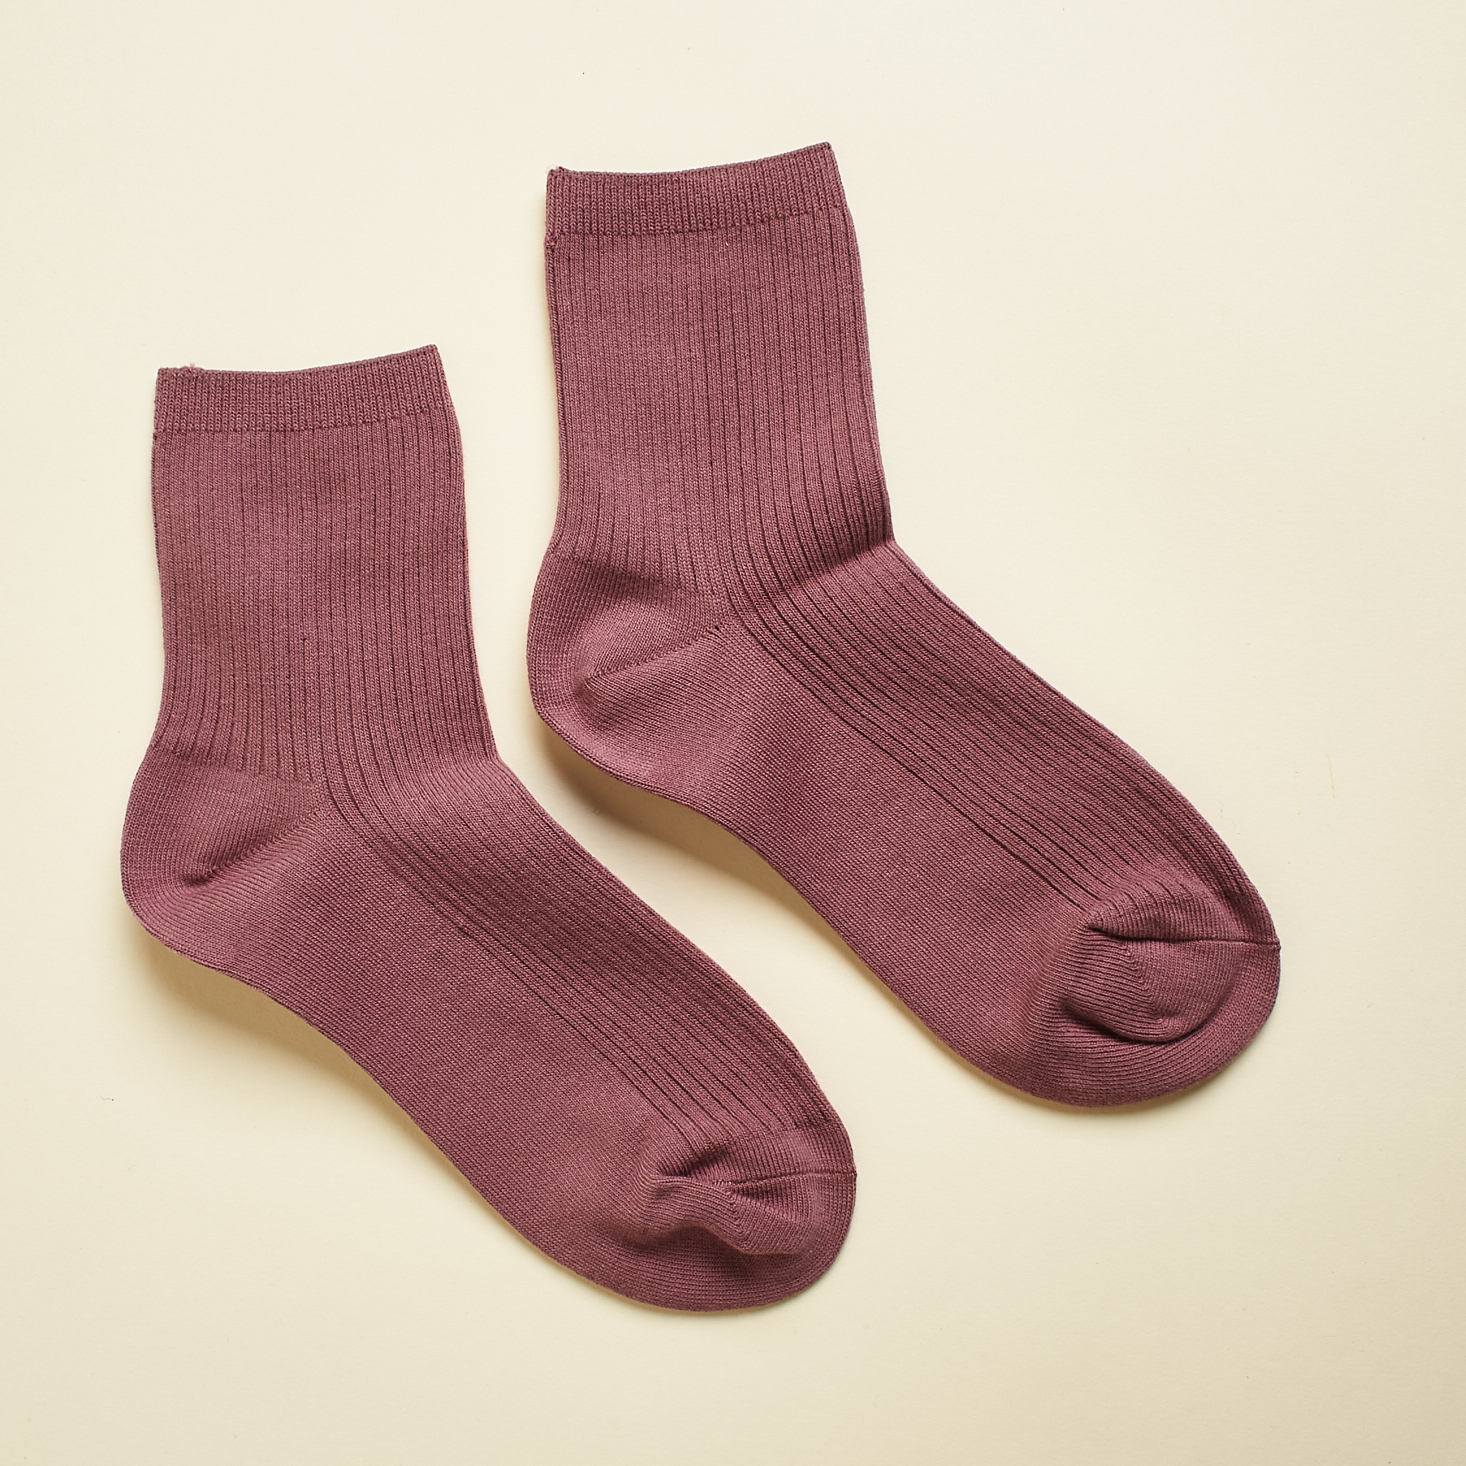 frank and oak ribbed socks in berry